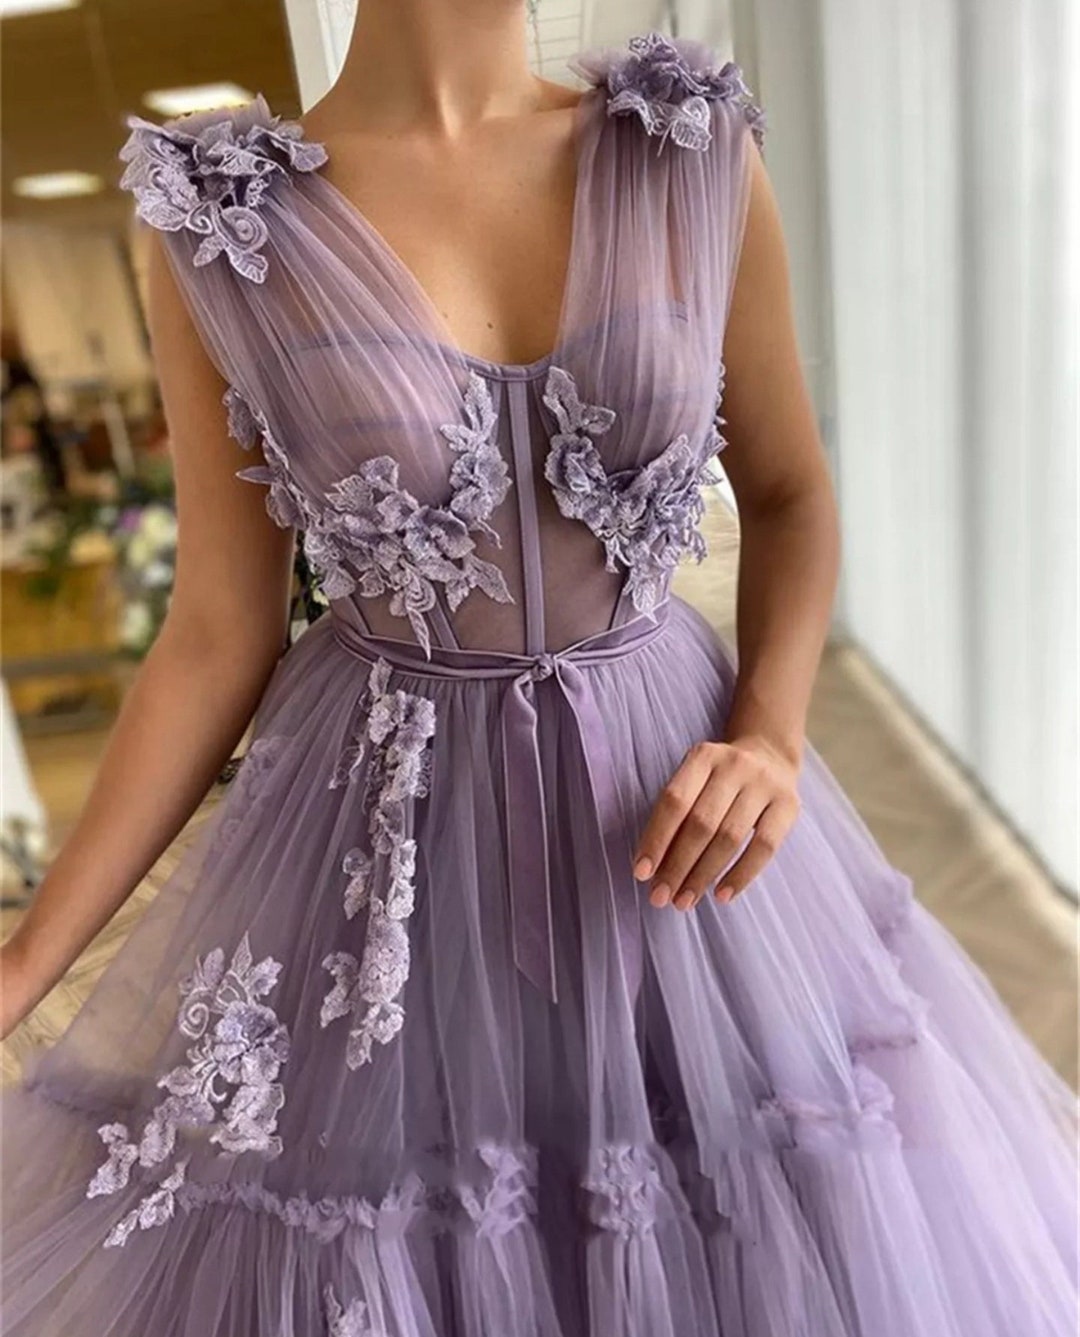 17 Beautiful Outfits With Pearls Aesthetic Glamhere.com